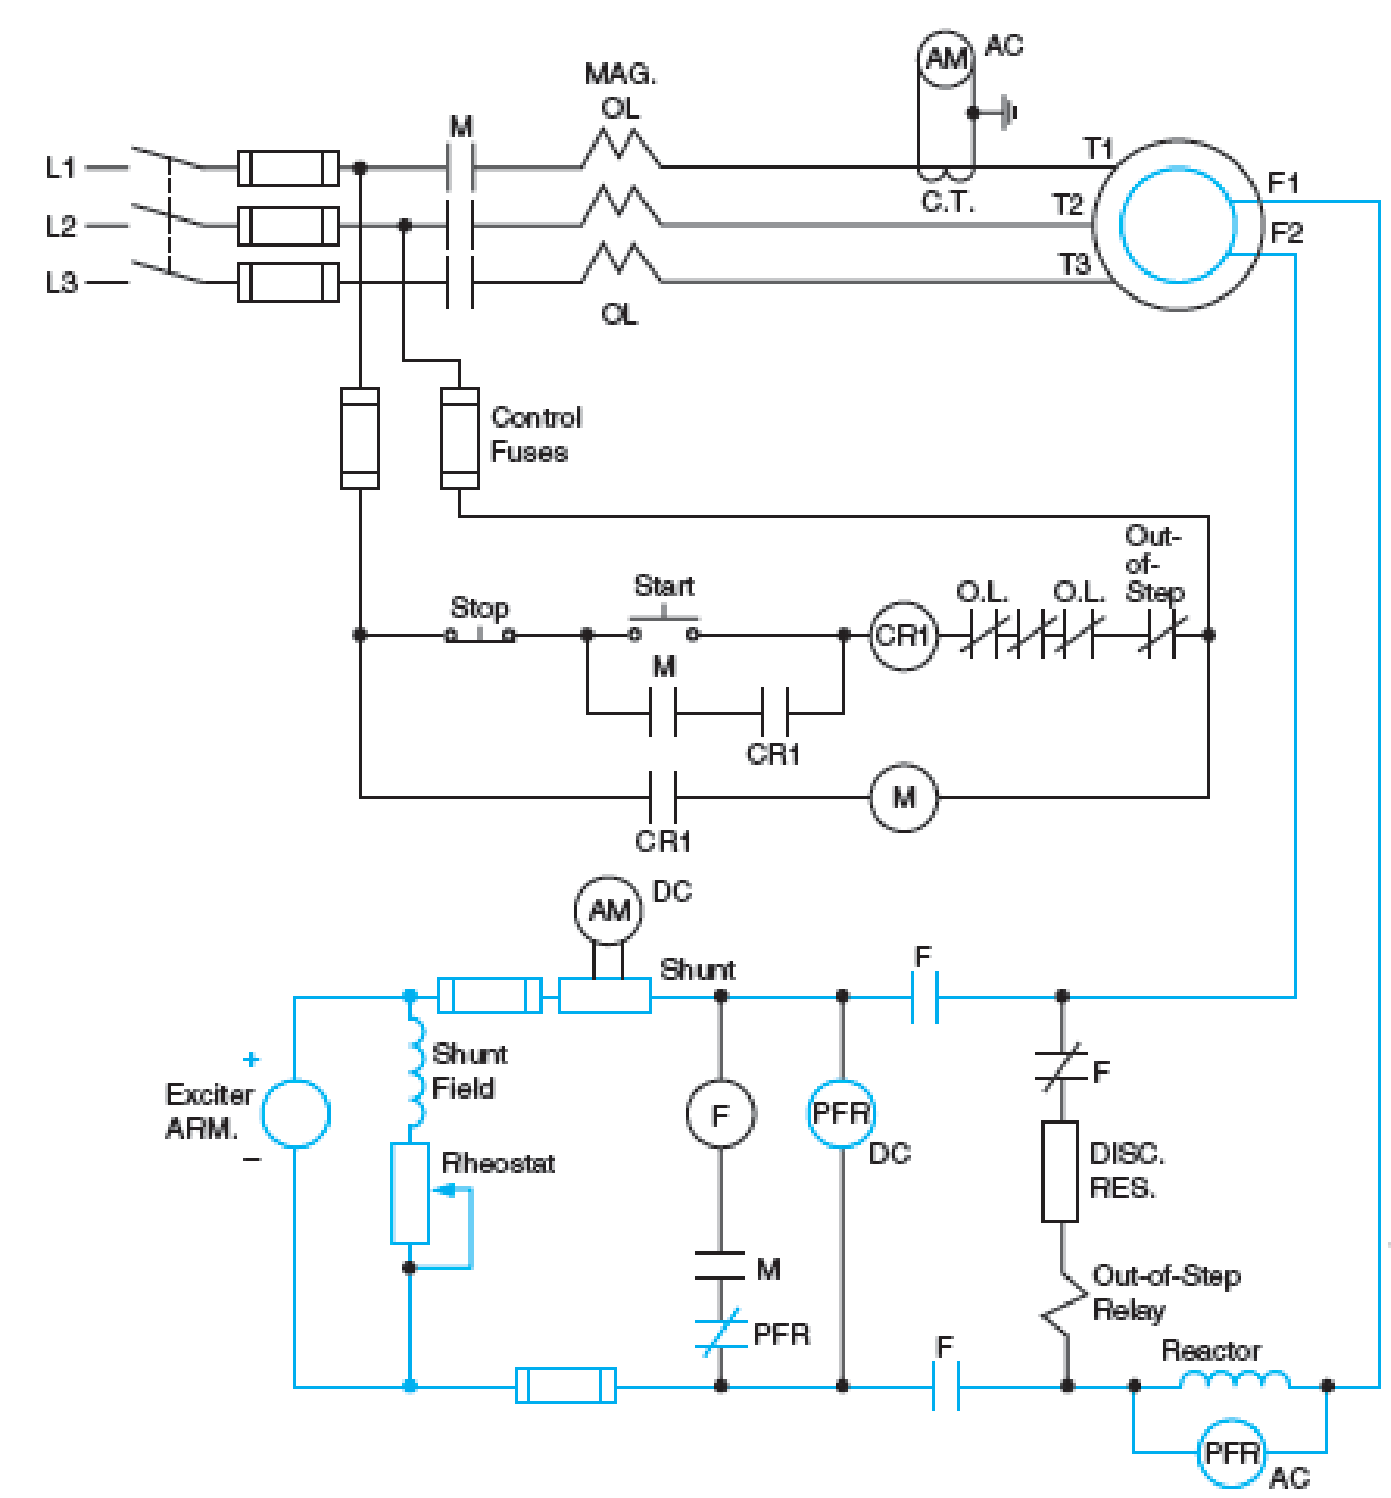 Chapter 42, Problem 10SQ, Why is a control relay (CR1) used in Figure 426? FIG. 426 Line diagram for automatic operation of 